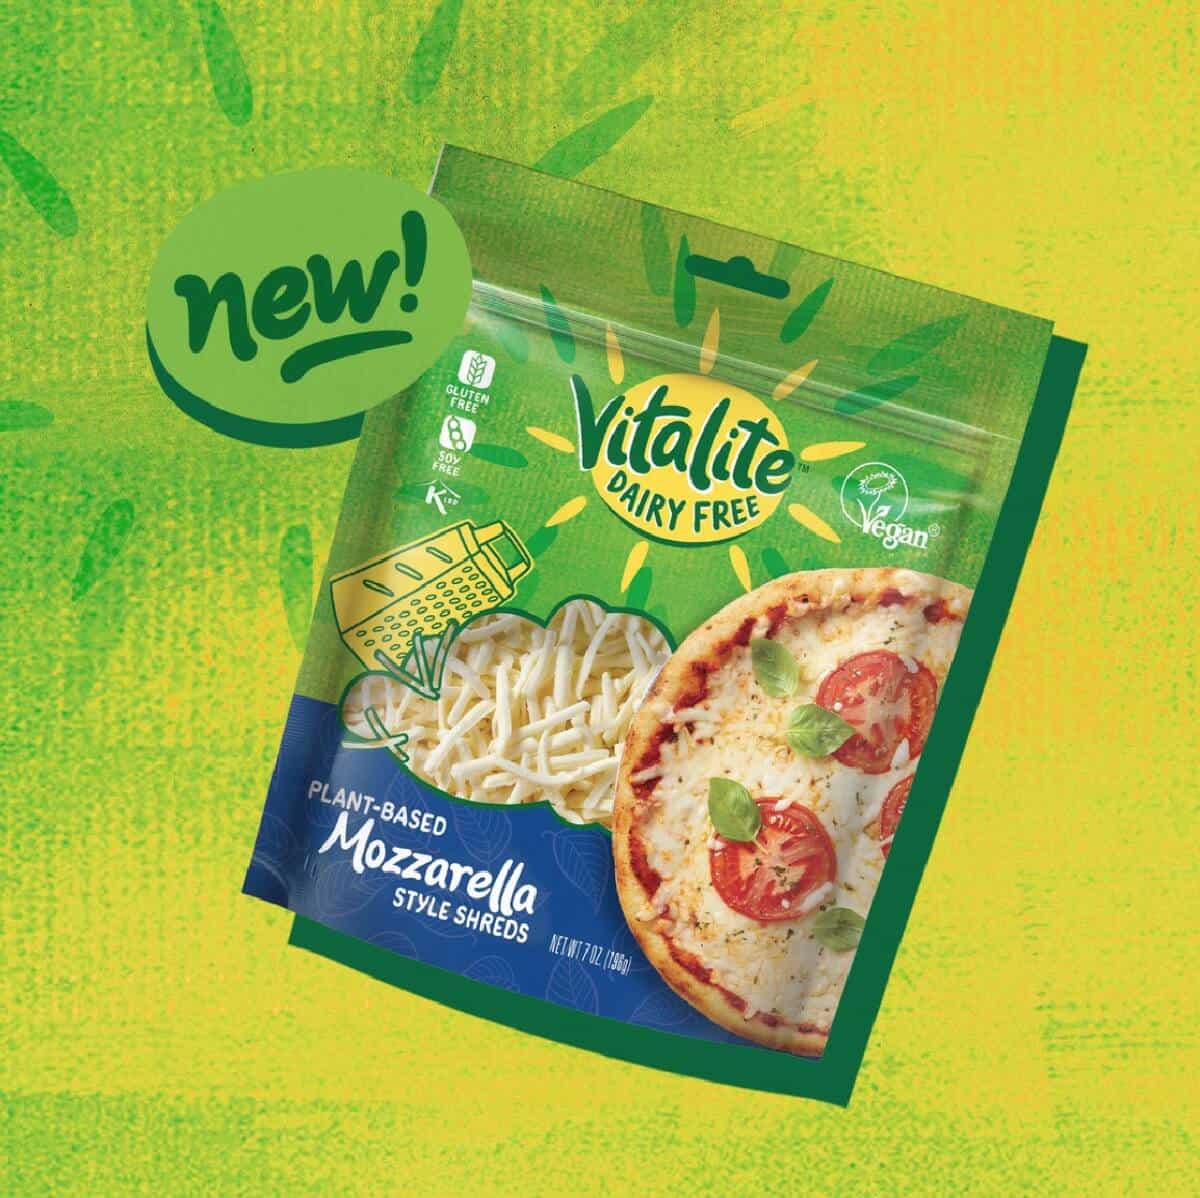 A green and blue pouch of Vitalite dairy-free mozzarella cheese shreds against a green and yellow background. 